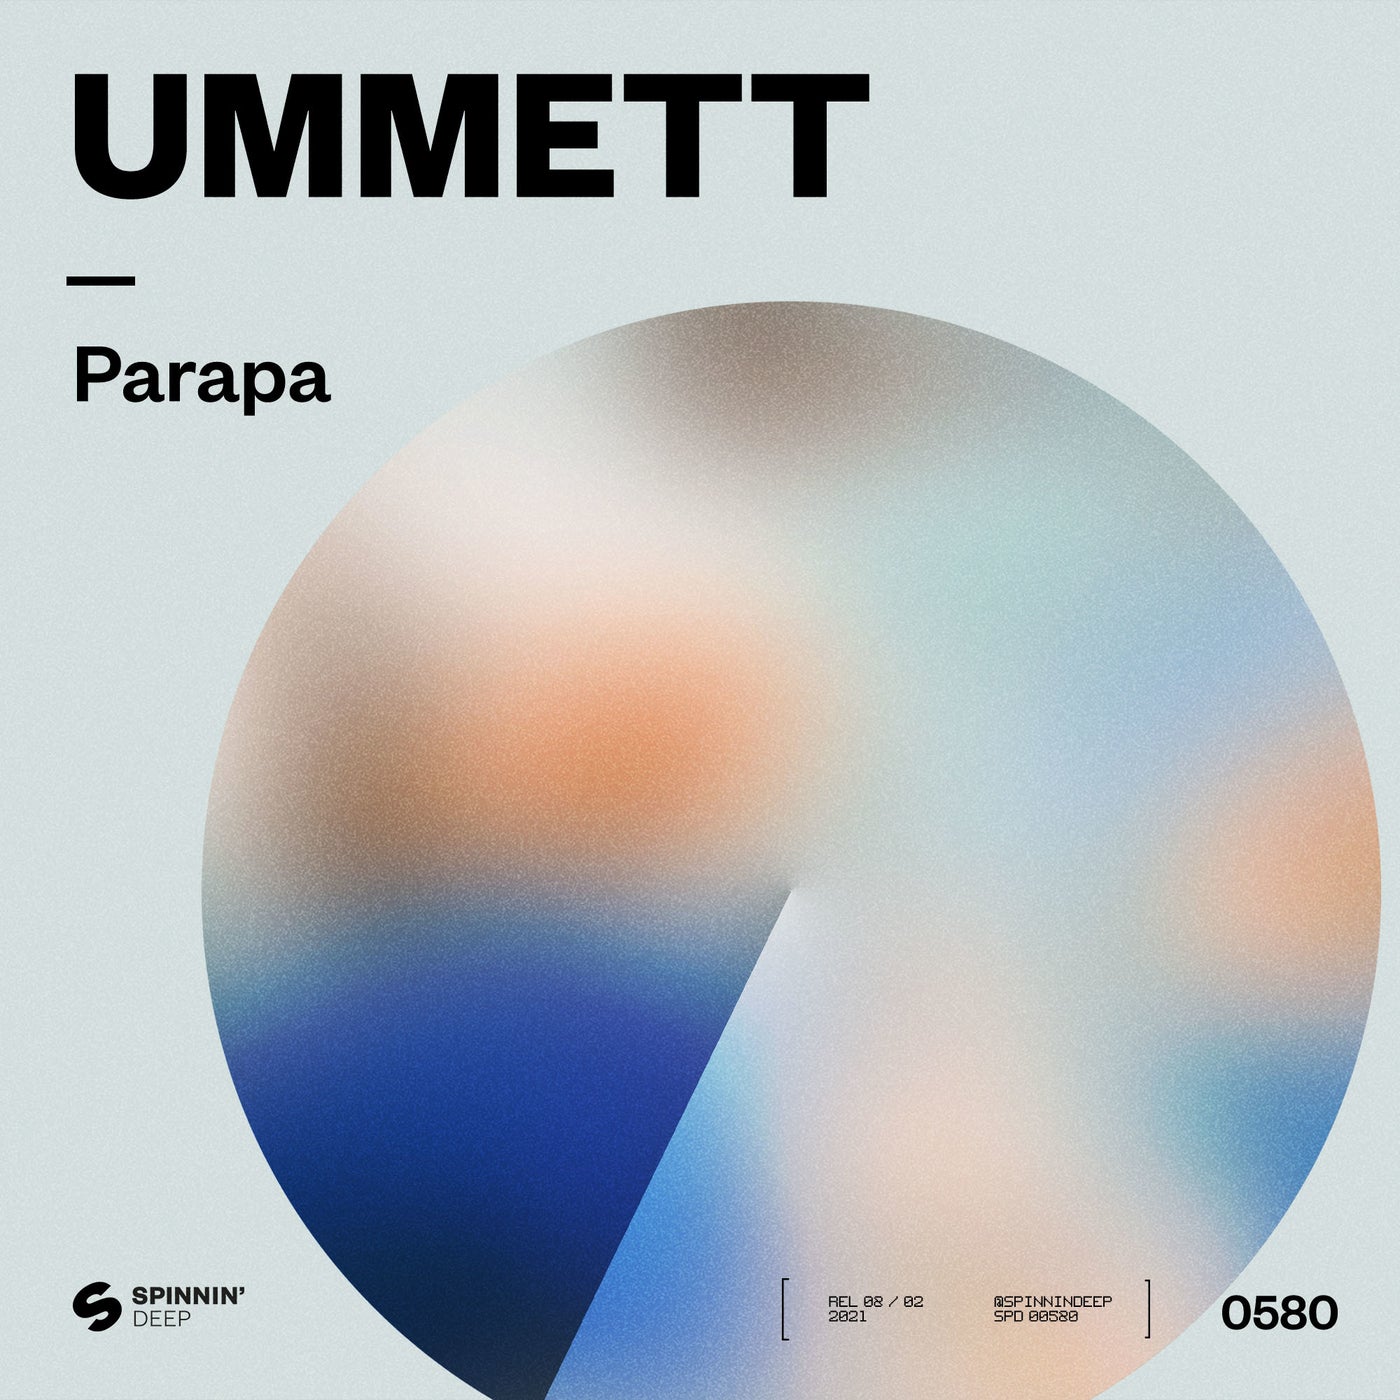 Parapa (Extended Mix)